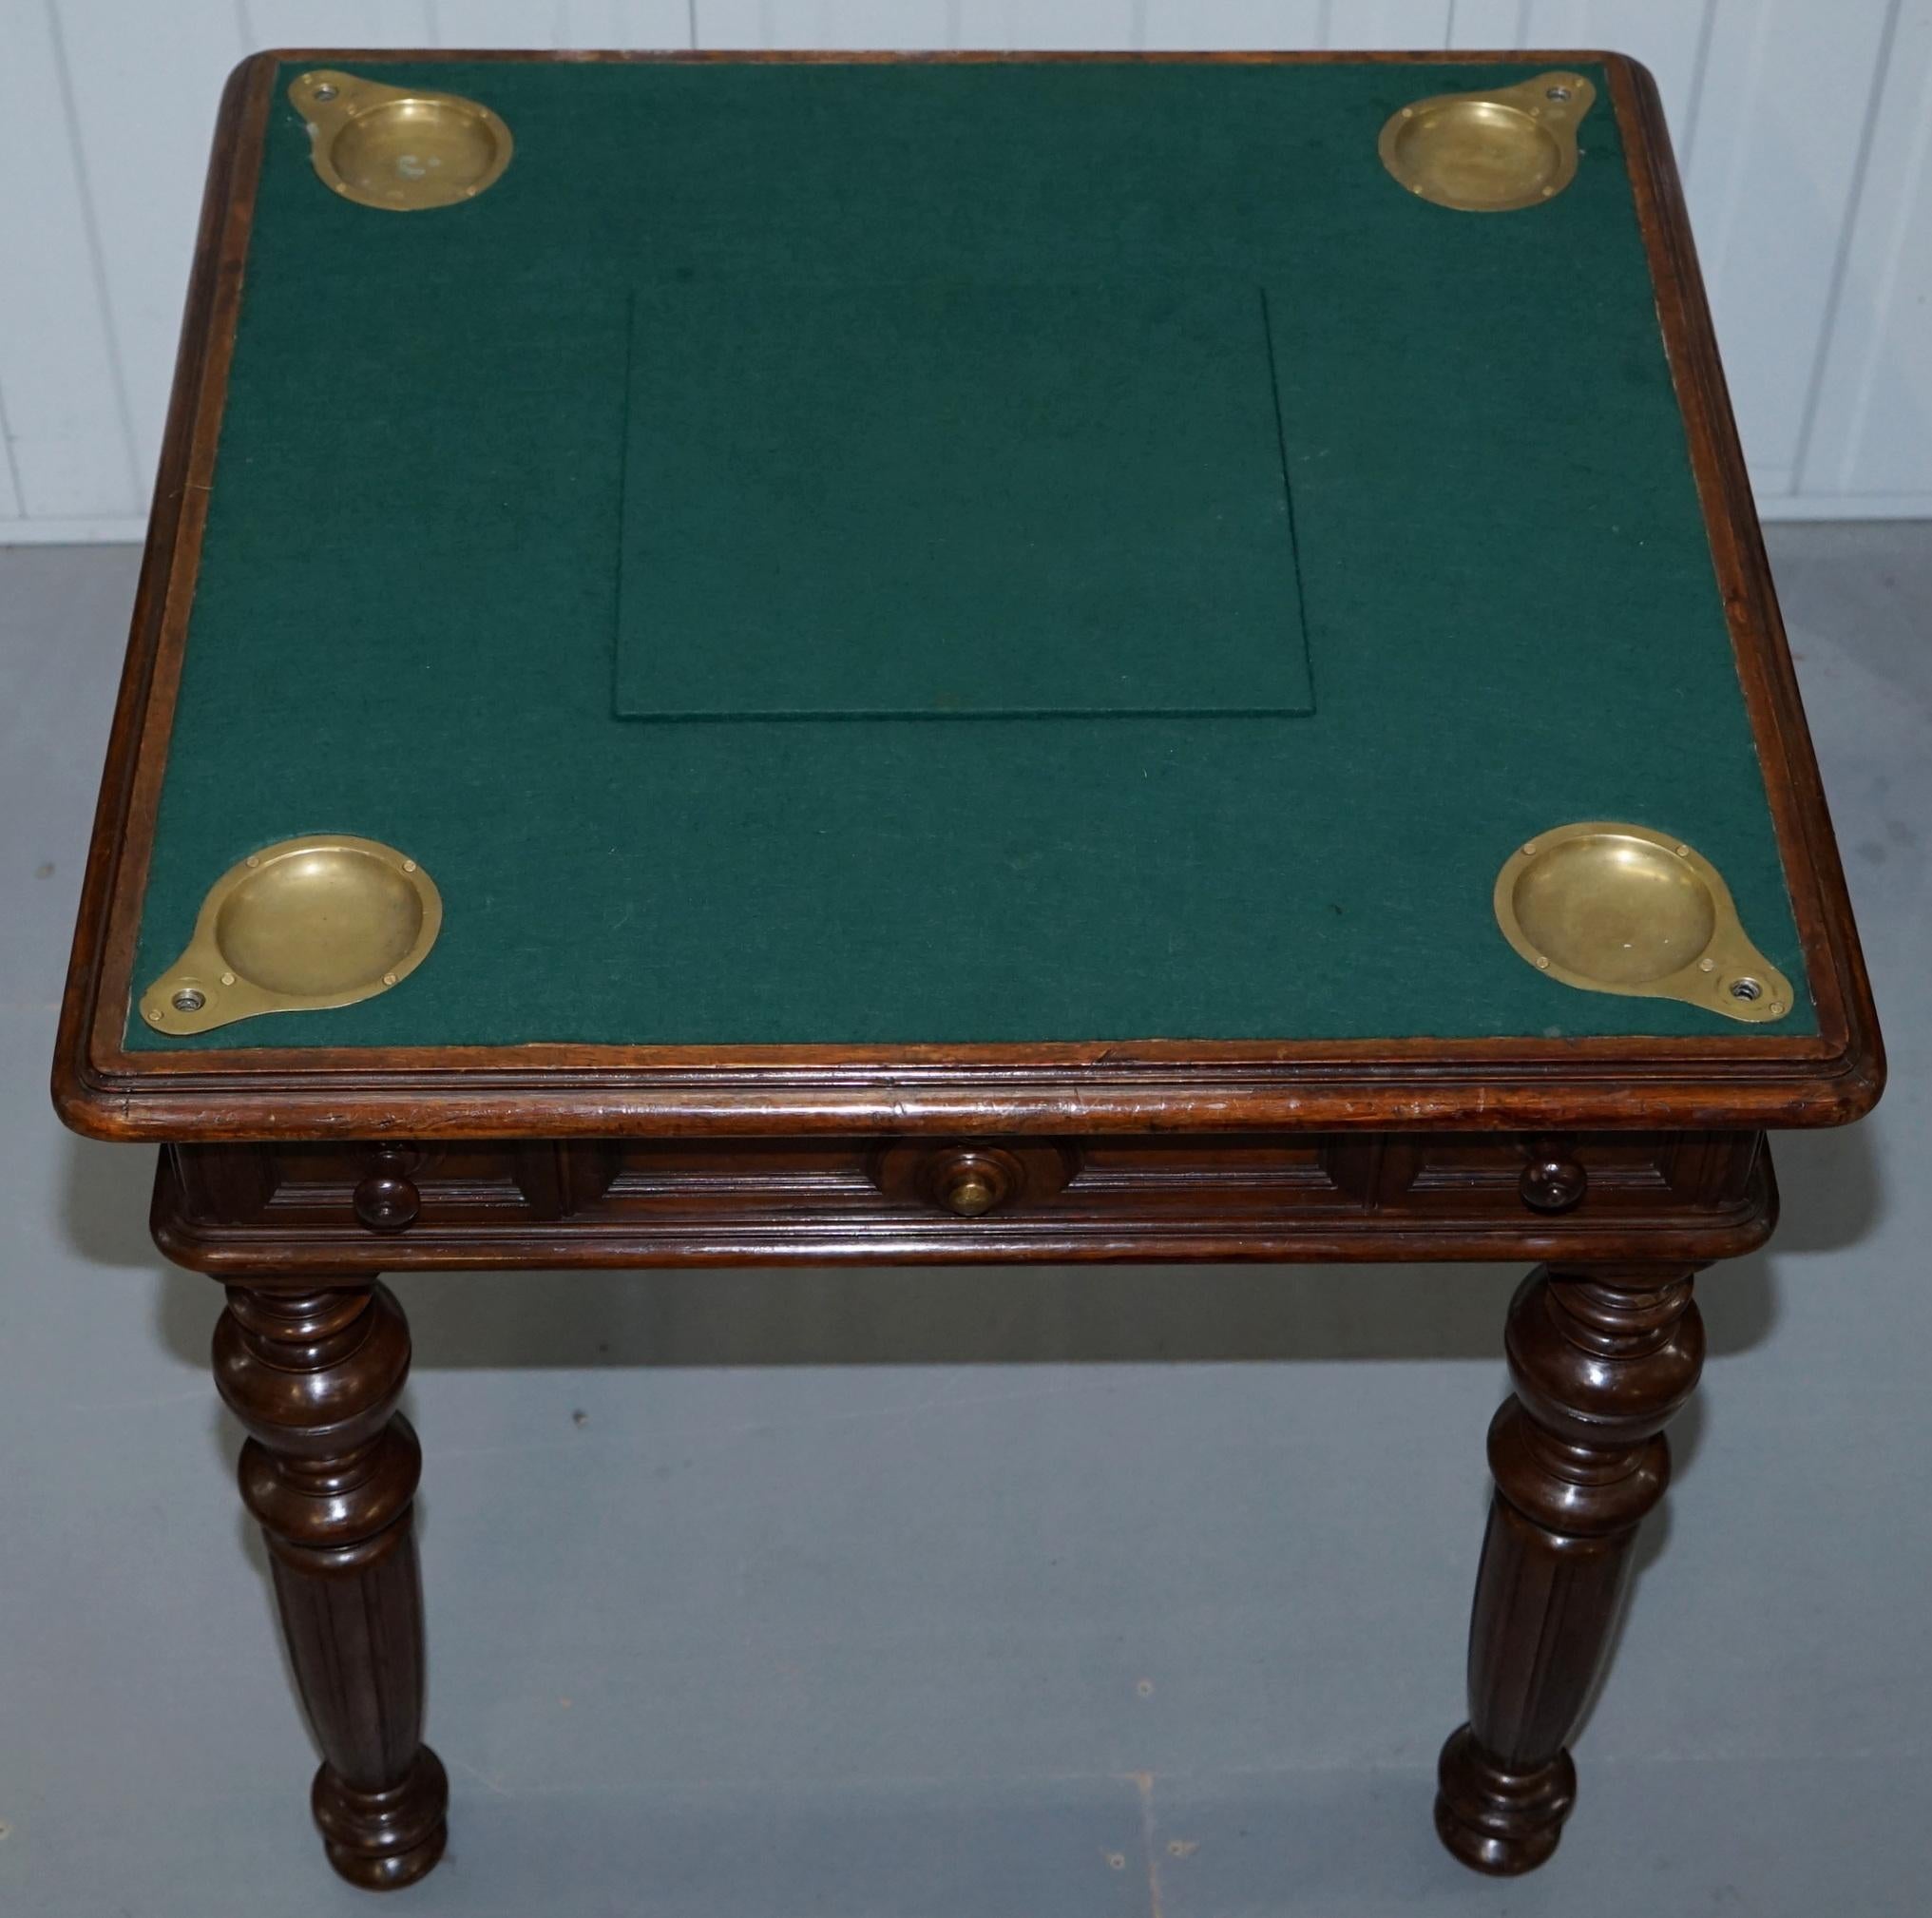 Hand-Carved Rare Victorian Games Table circa 1840 Drop Middle Secret Drawers and Buttons For Sale